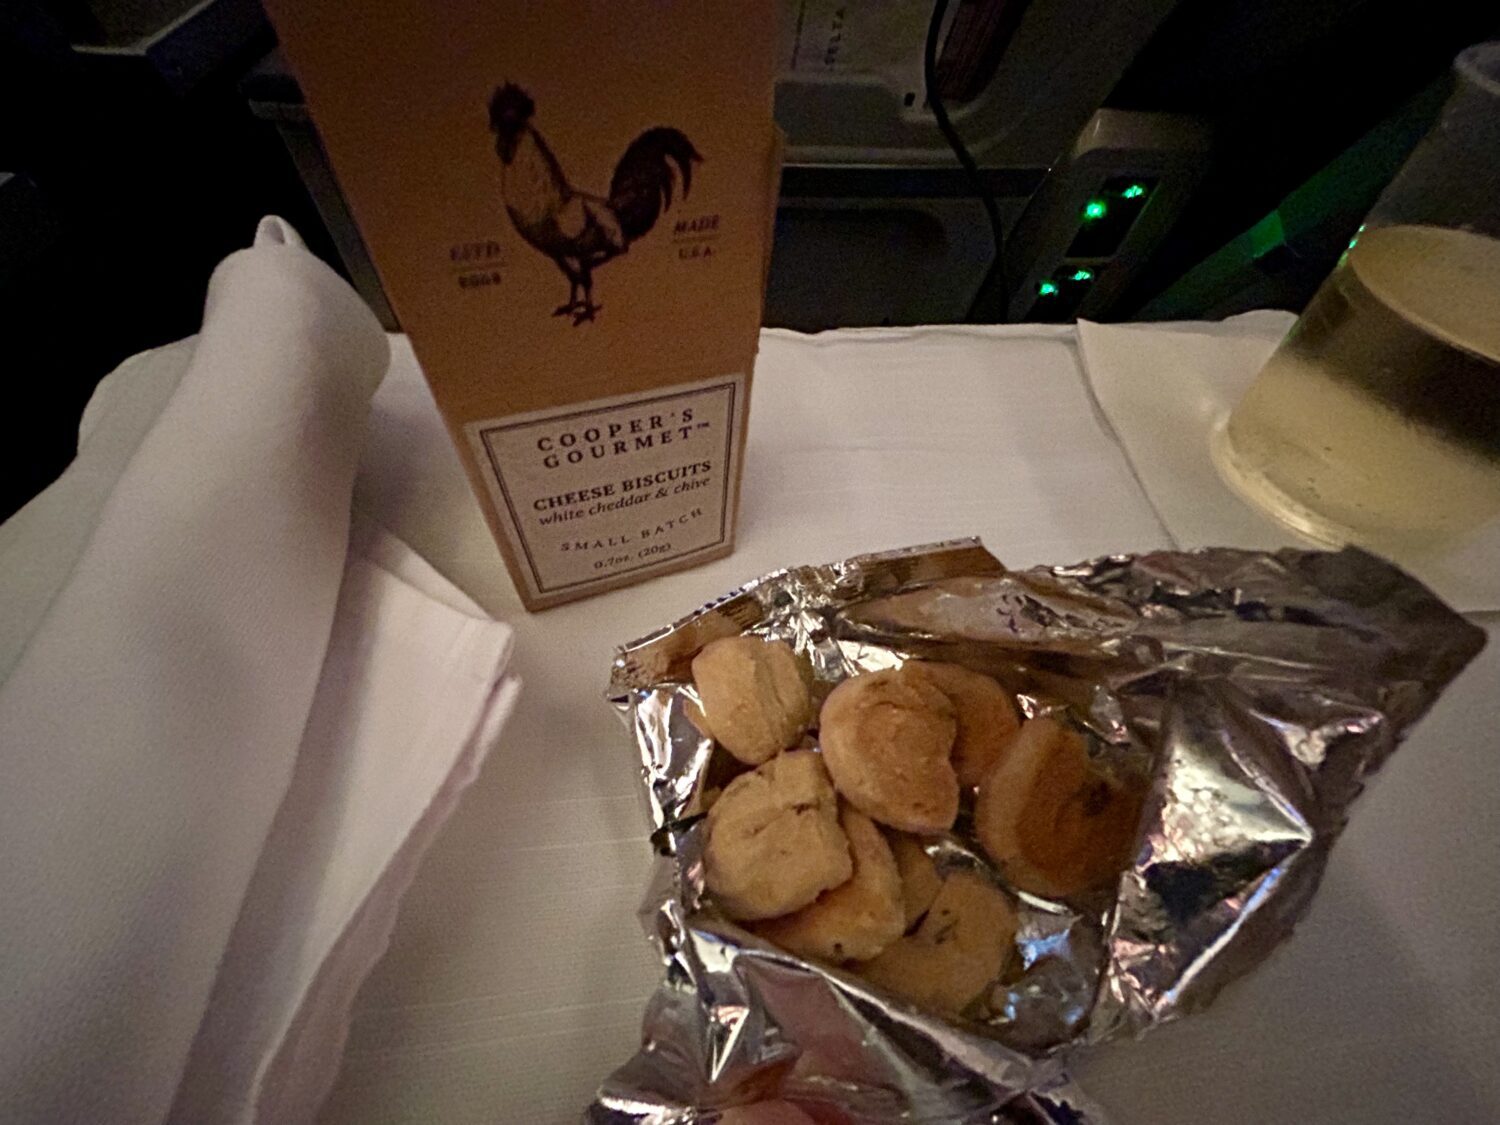 Delta Premium Select cheese biscuits